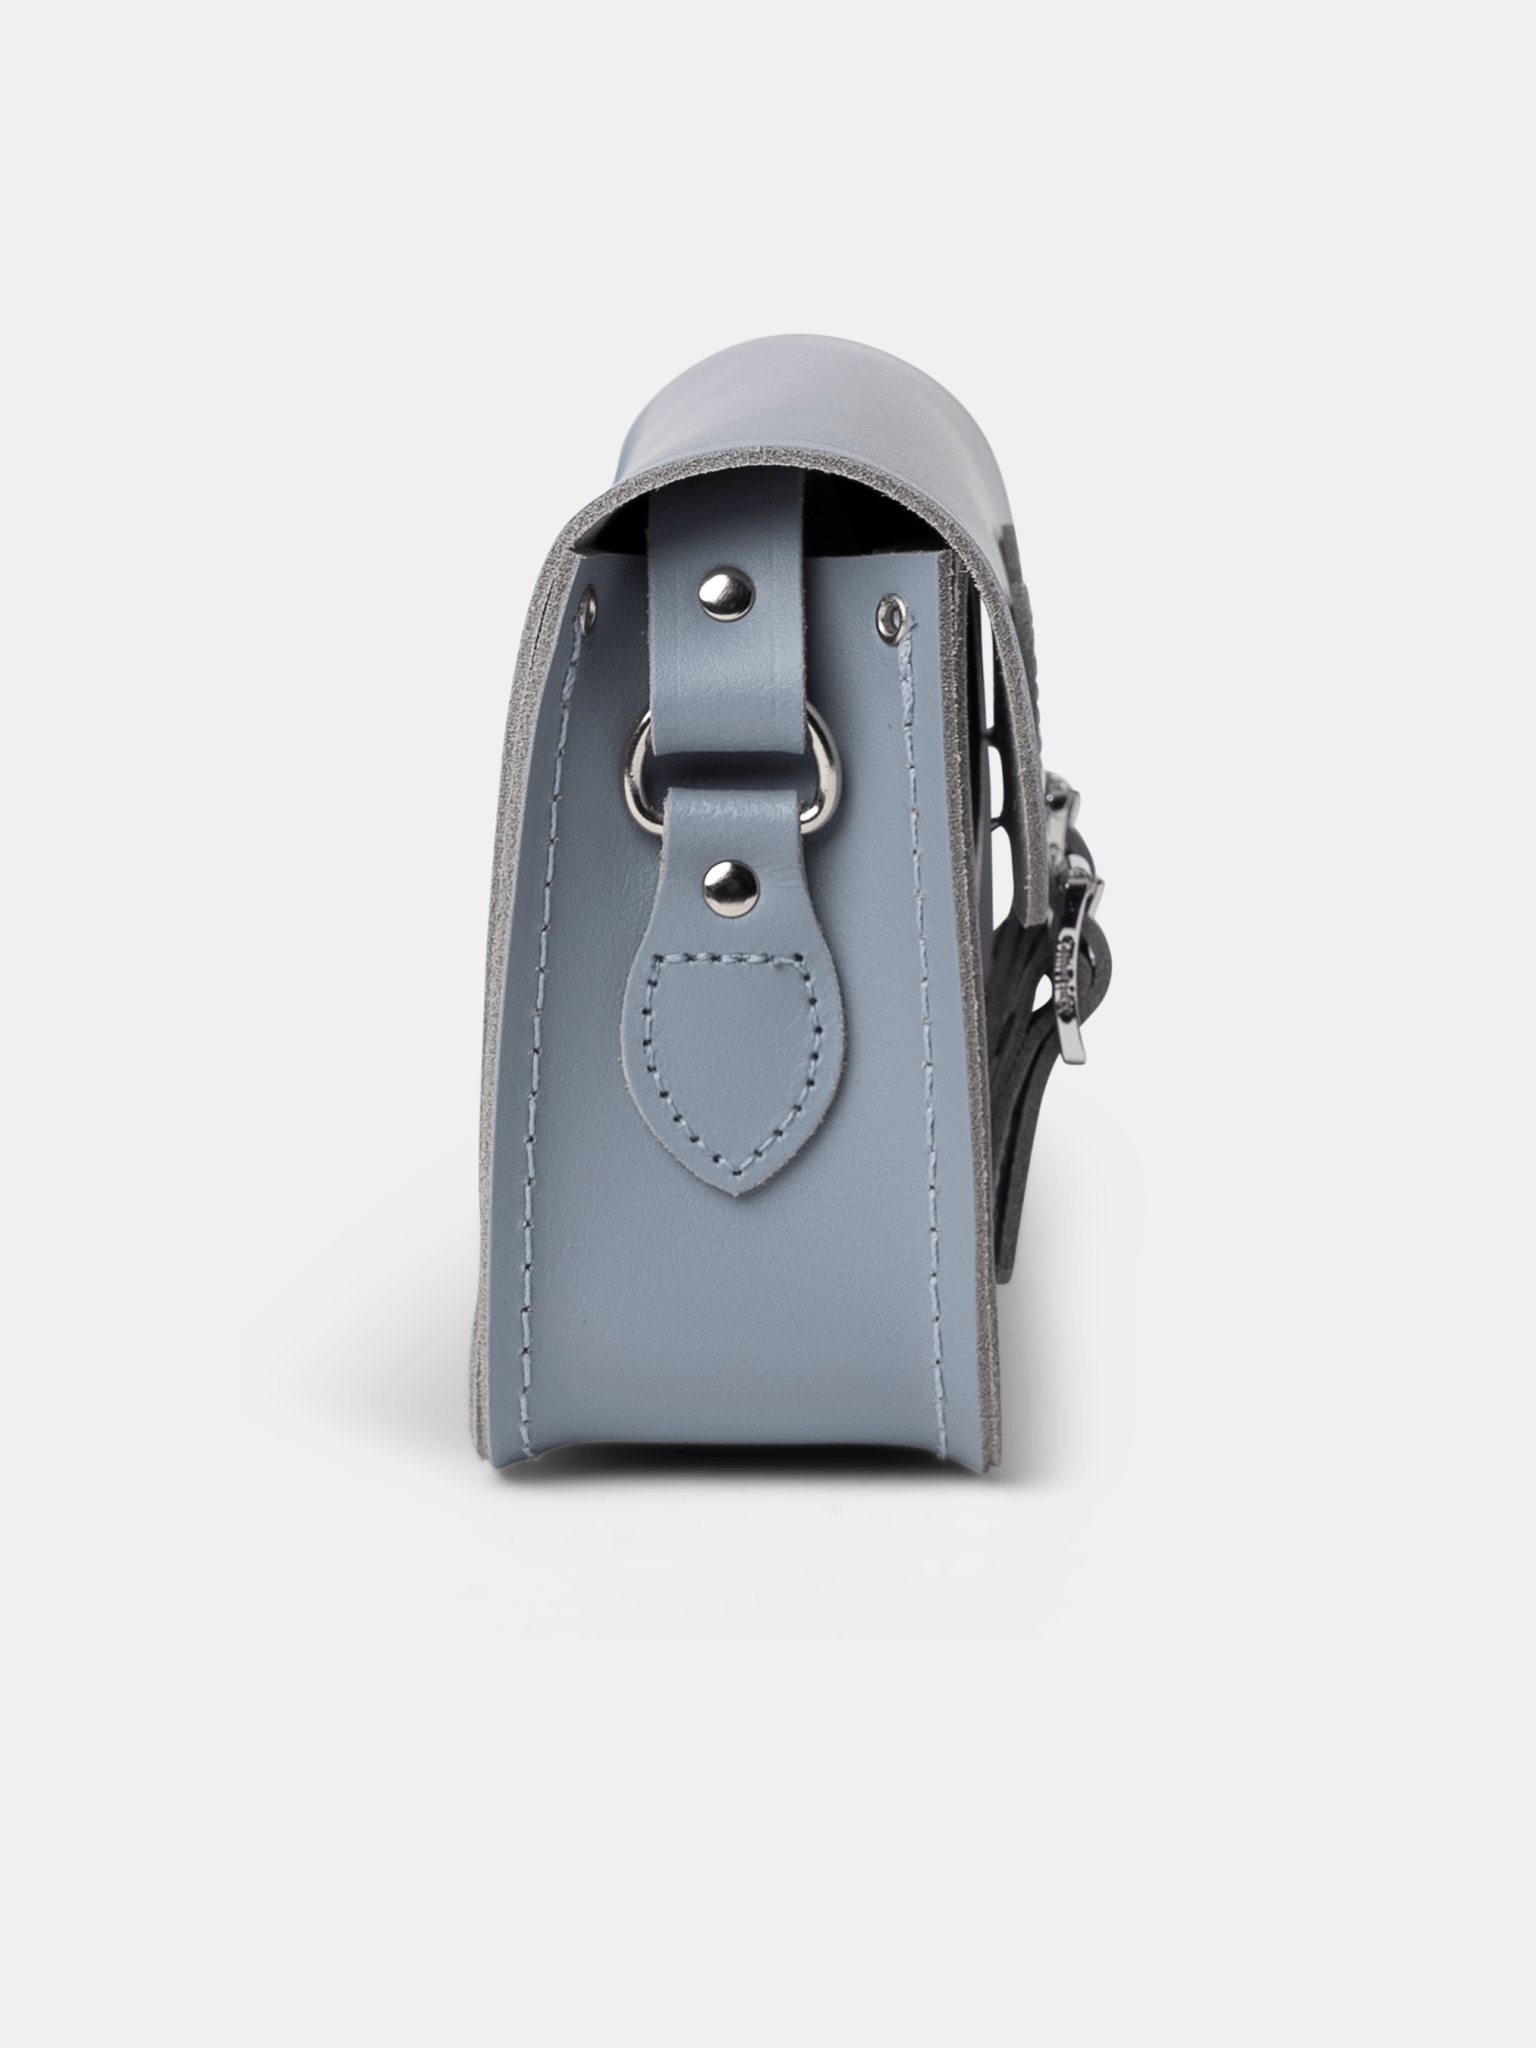 The Little One - French Grey - The Cambridge Satchel Company EU Store